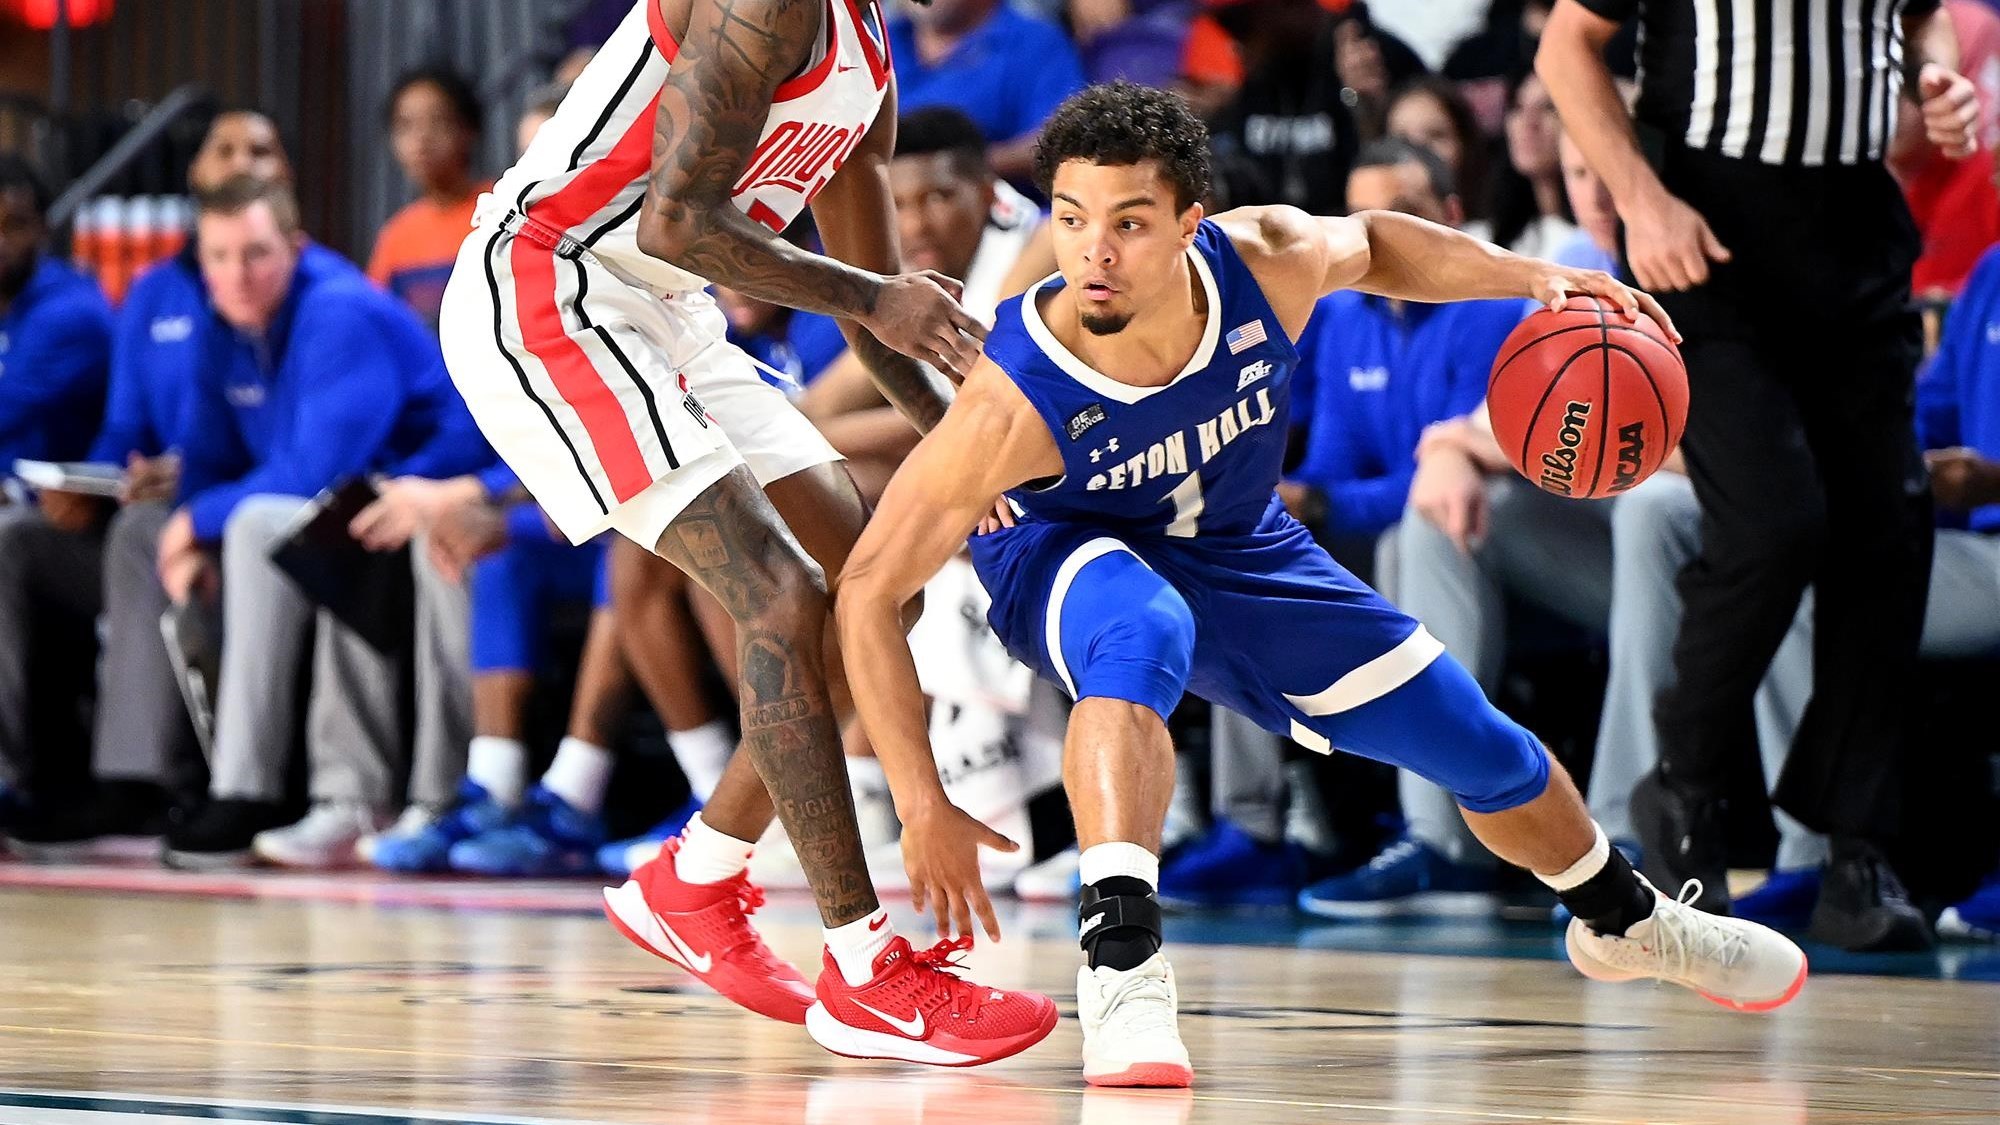 Seton Hall's Bryce Aiken avoids defenders during a Fort Myers Tip-Off game against Ohio State.